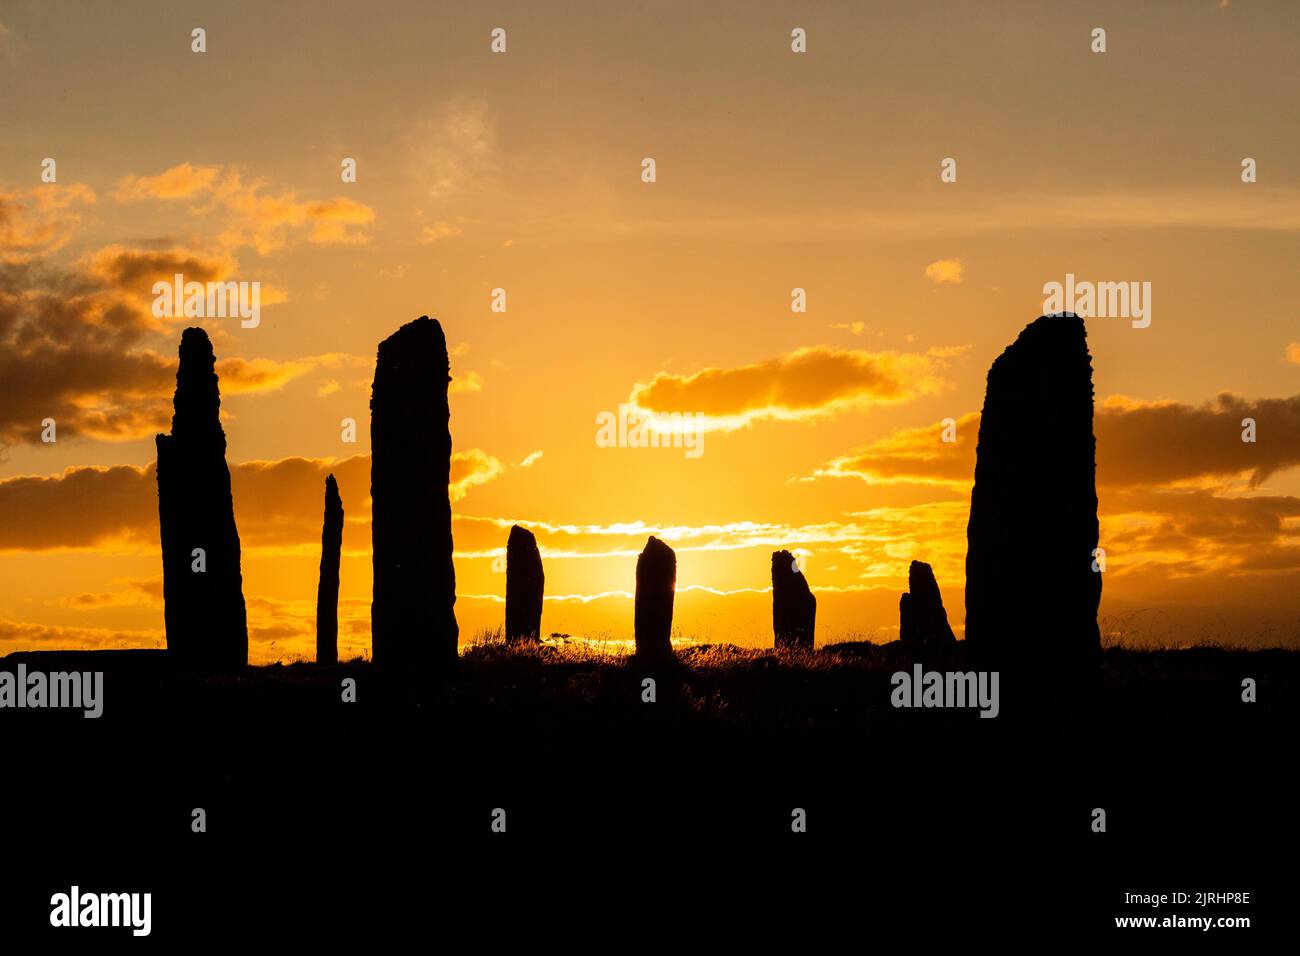 Orkney, UK. 24th Aug, 2022. The Ring of Brodgar, Orkney, looks dramatic as the sun sets. The 4,500 year old neolithic stone circle is part of the Heart of Neolithic Orkney World Heritage Site, and of the 60 original stones just 36 survive. Credit: Peter Lopeman/Alamy Live News Stock Photo